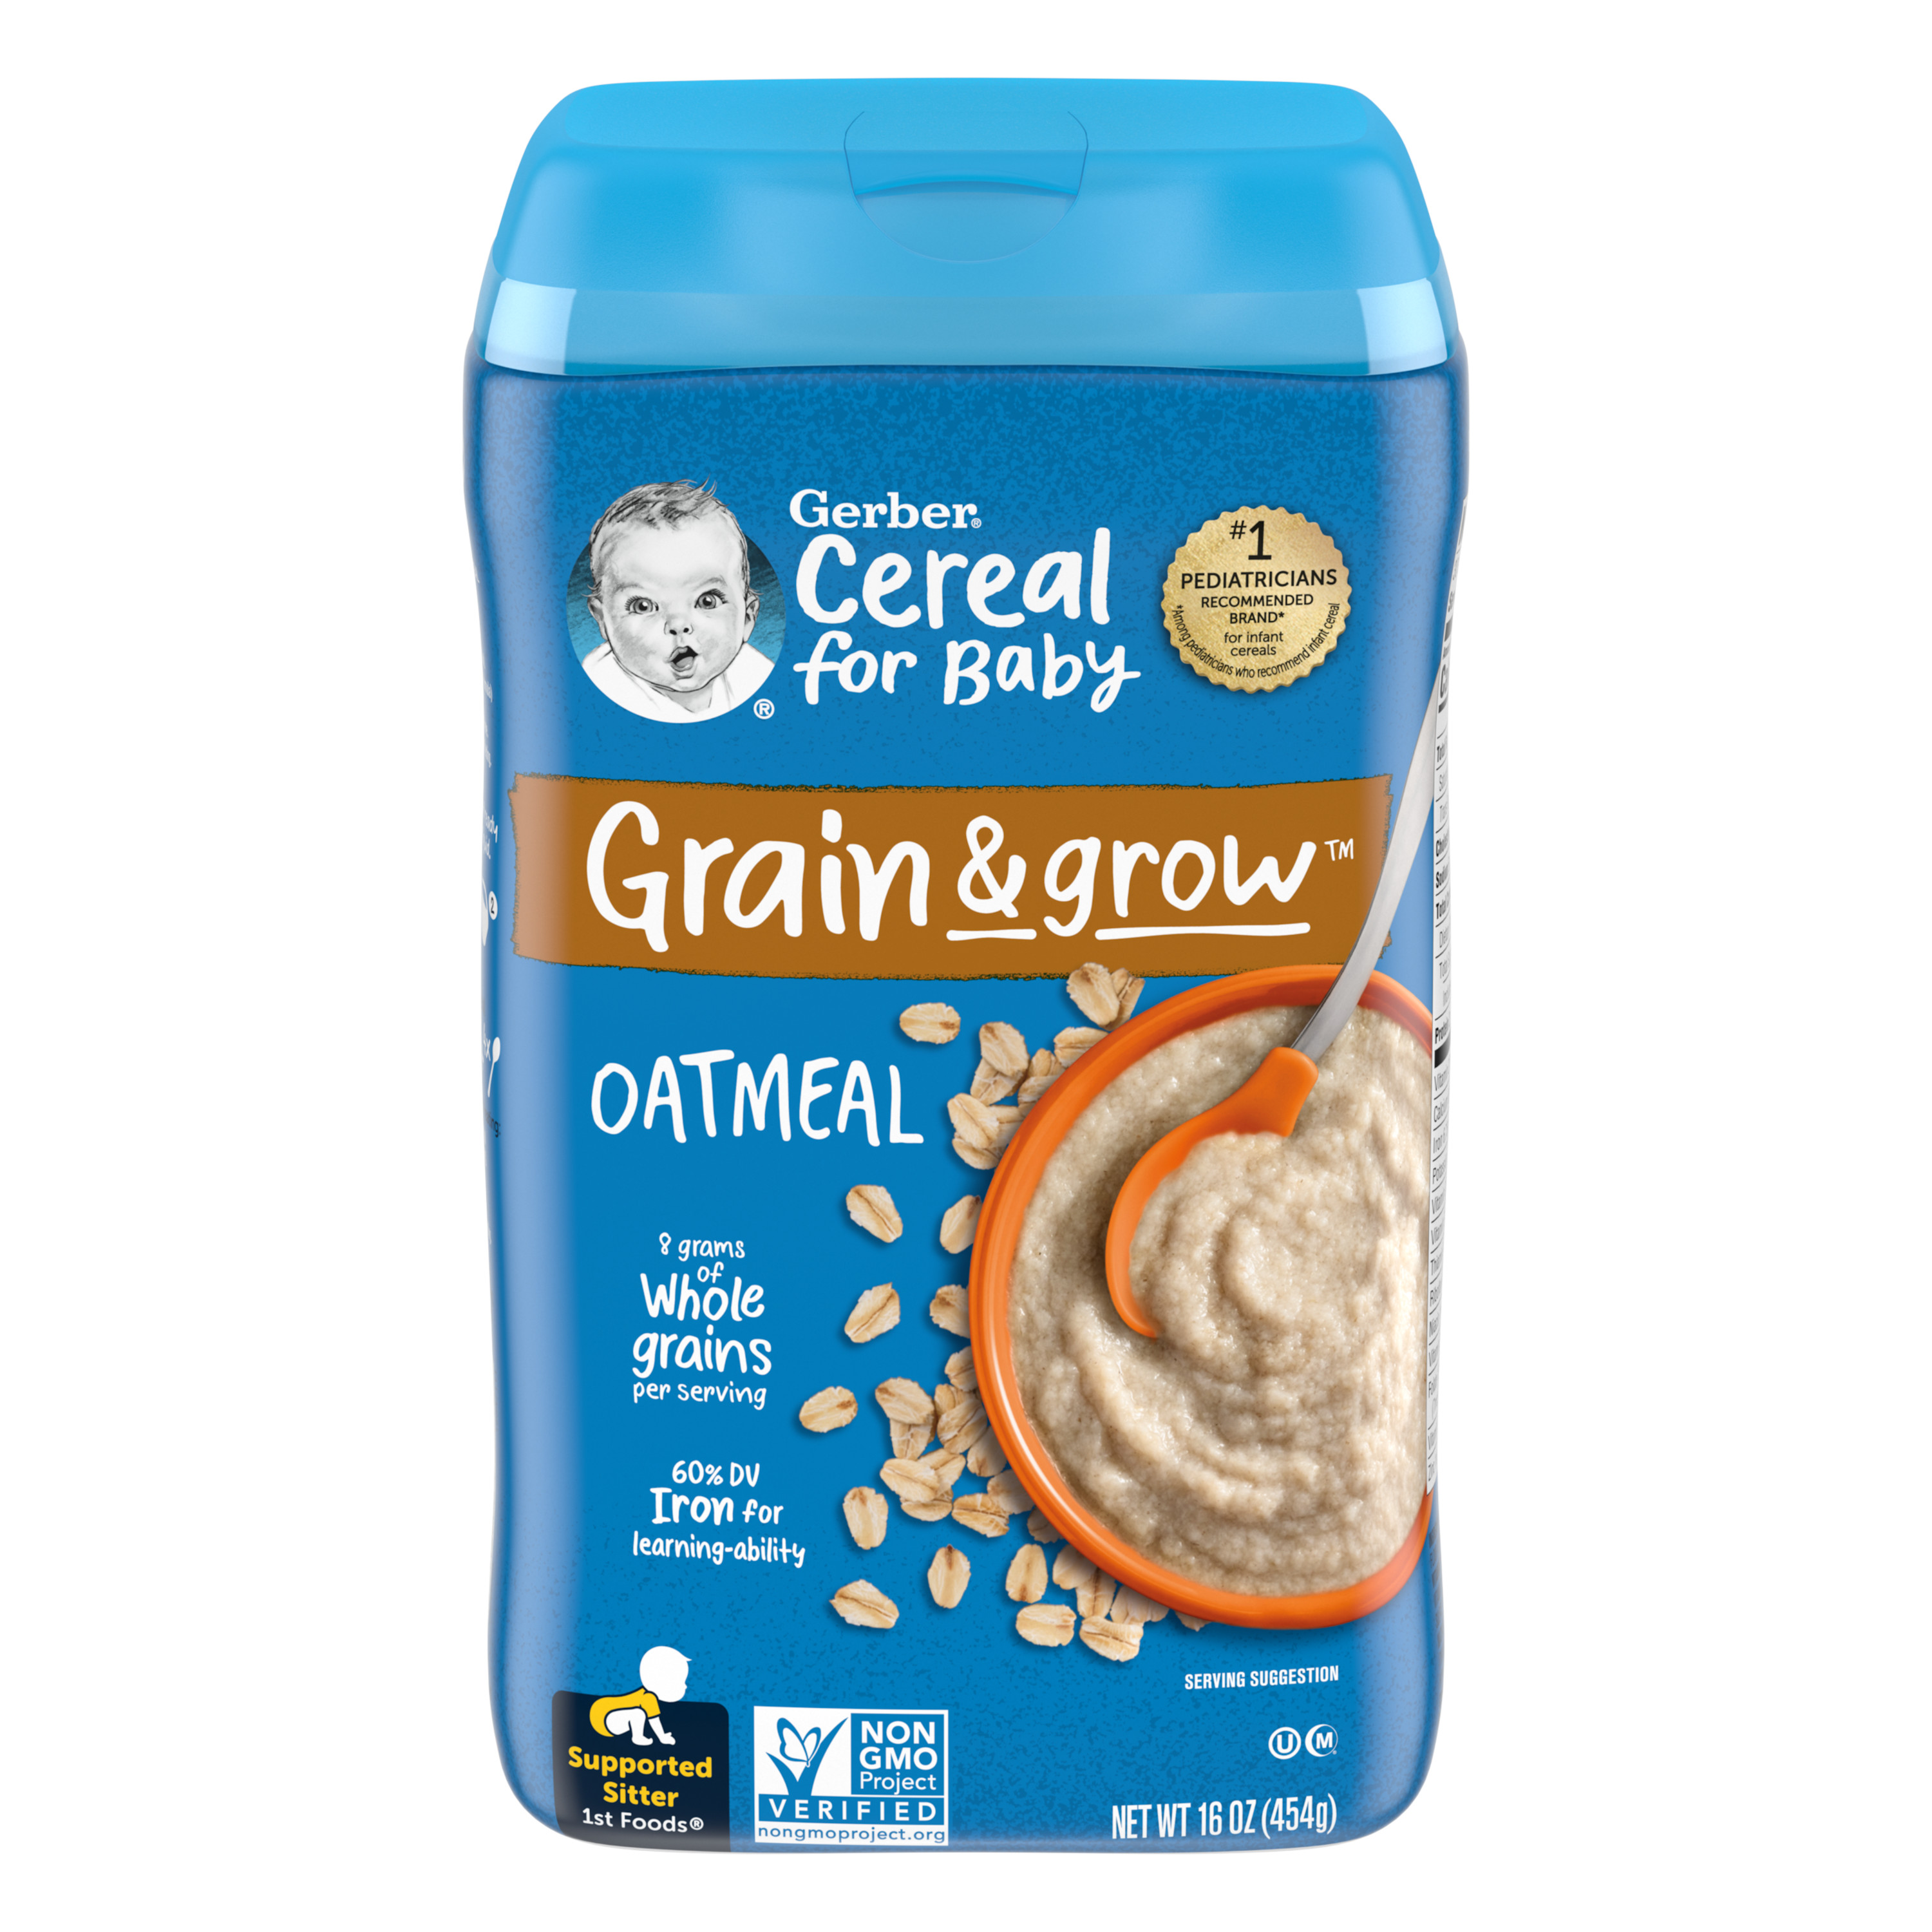 Gerber Baby Cereal 1st Foods, Supported Sitter, Grain & Grow, Oatmeal, Clean Label Project, 15 Oz - image 1 of 9